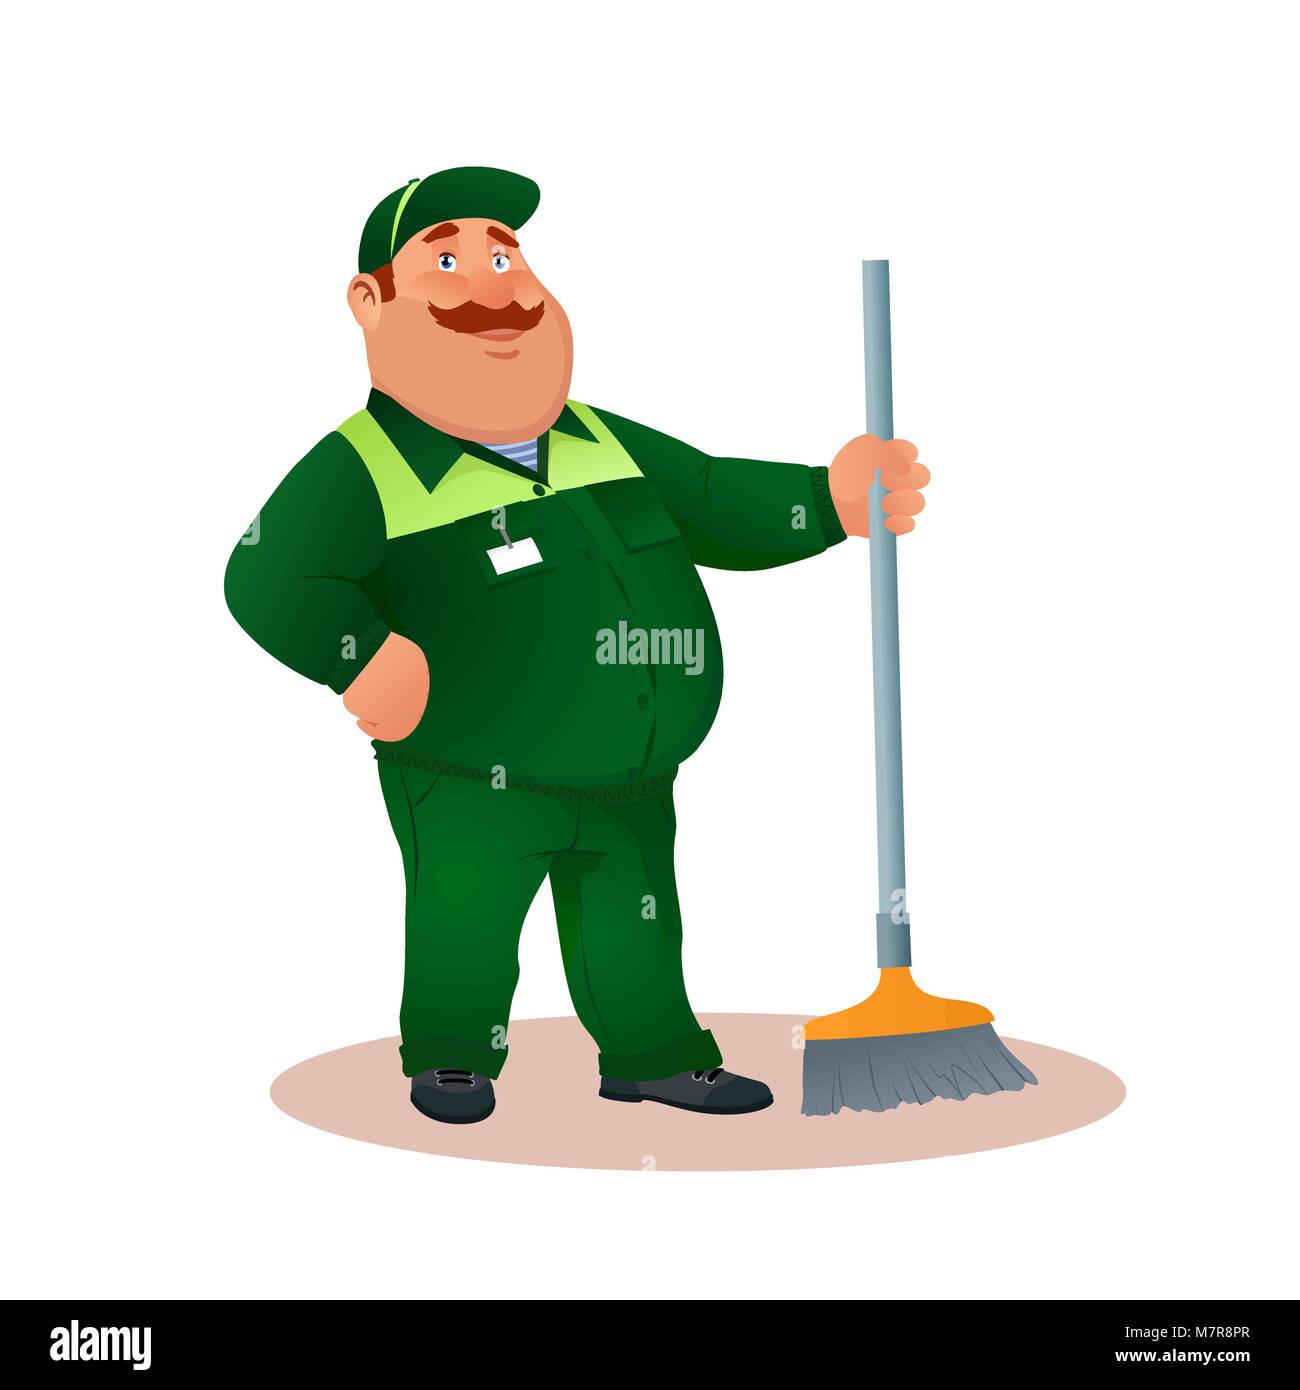 Smiling cartoon janitor with mop. Funny fat character in green suit with broom. Happy flat cleaner in uniform from janitorial service or office cleaning. Colorful vector illustration. Stock Vector